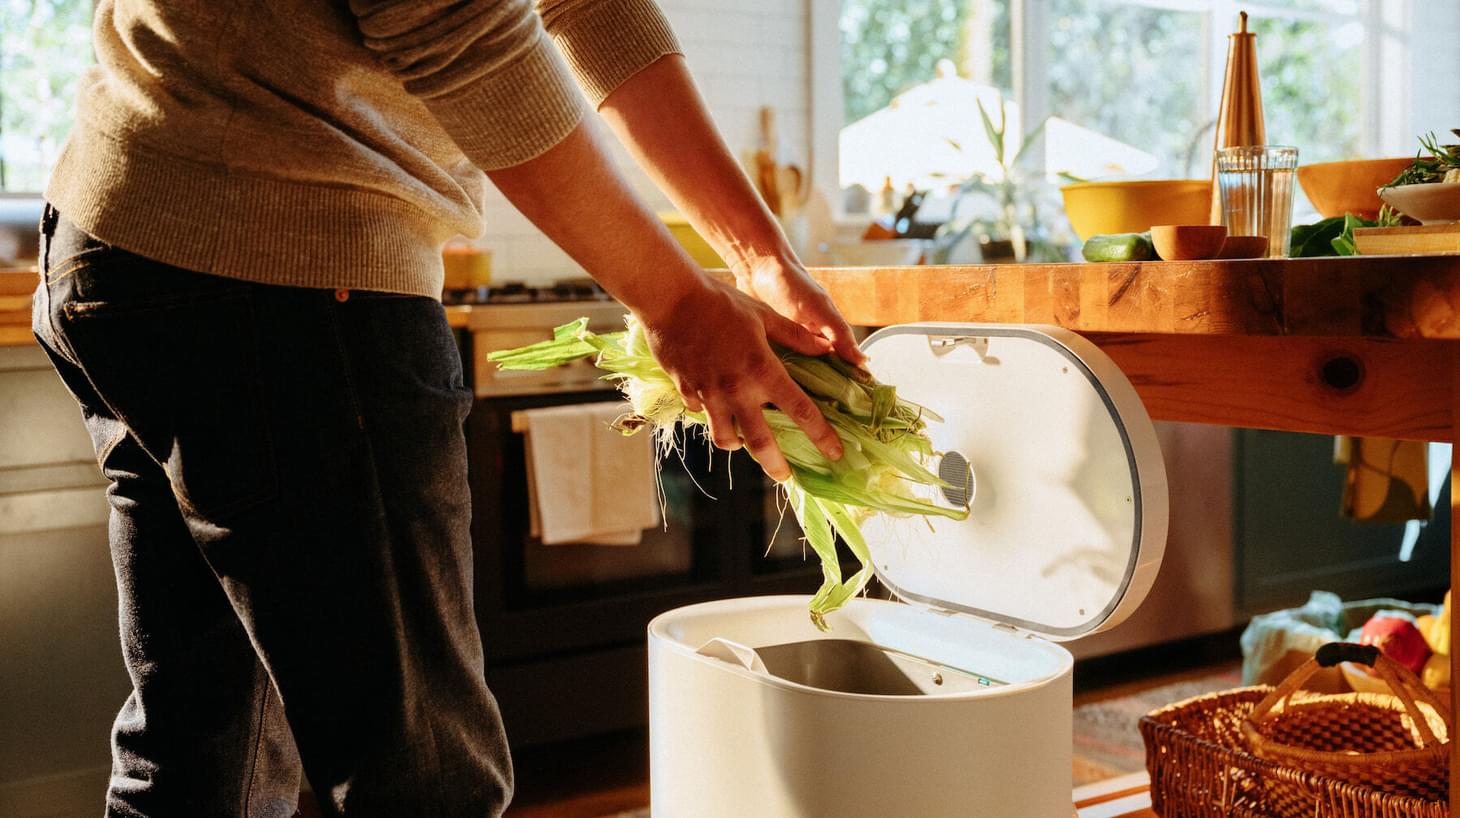 In a bright kitchen a man is throwing corn husks in a compost bin